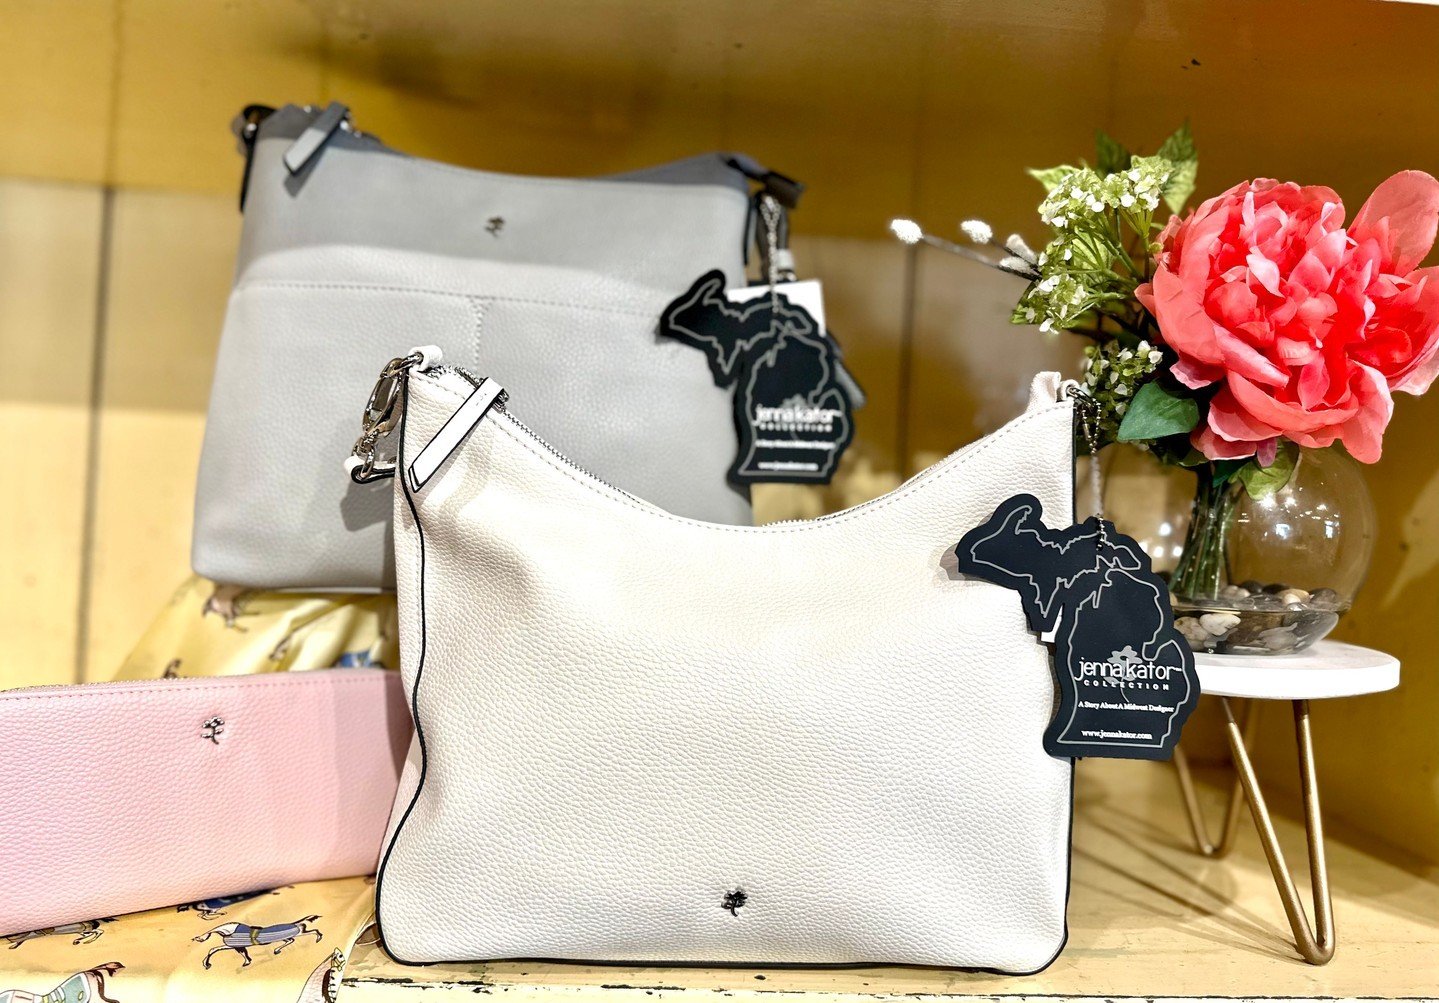 A new purse is always pleasing, but when it's designed by a Michigander? Even better! Grab a new Jenna Kator Handbag for mom (or any special lady in your life).